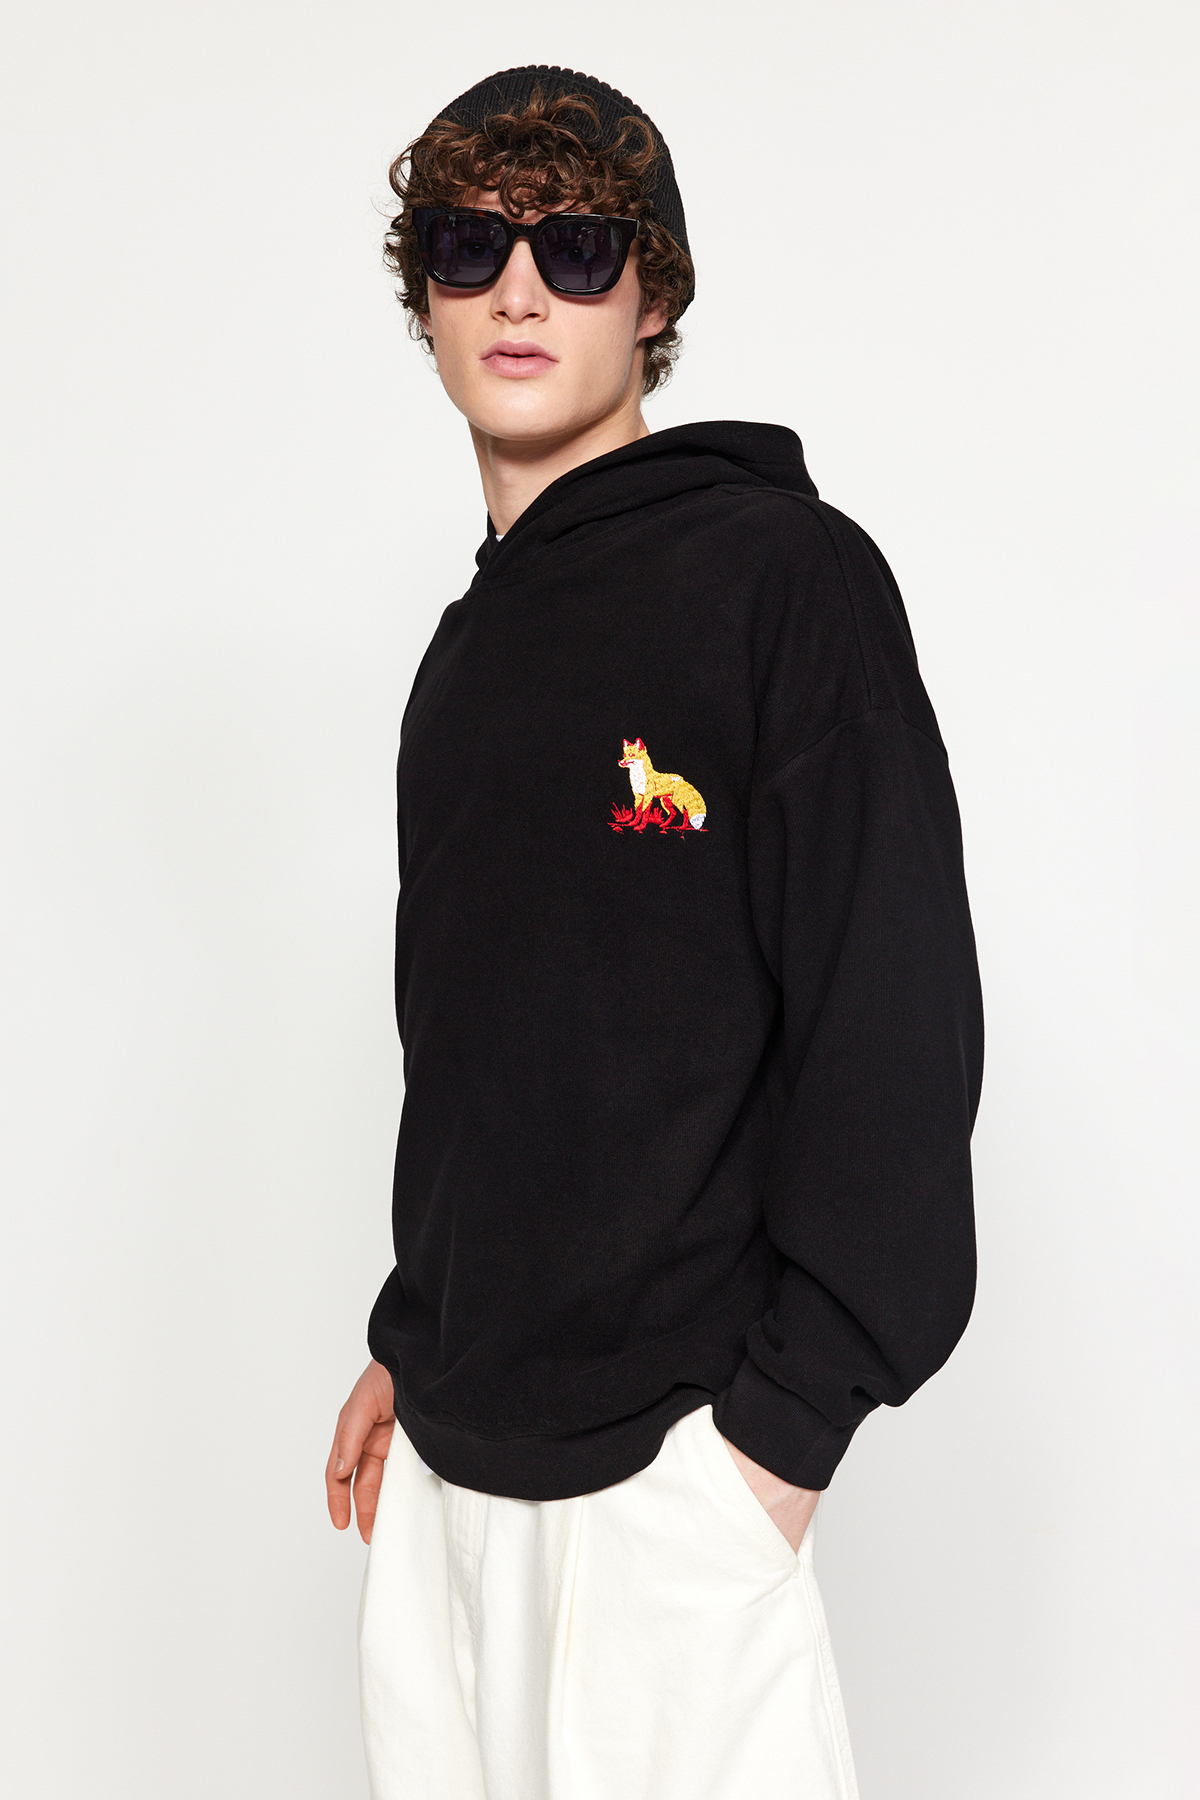 Trendyol Men's Black Oversize/Wide-Fit Limited Edition Hooded Animal Embroidery Sweatshirt